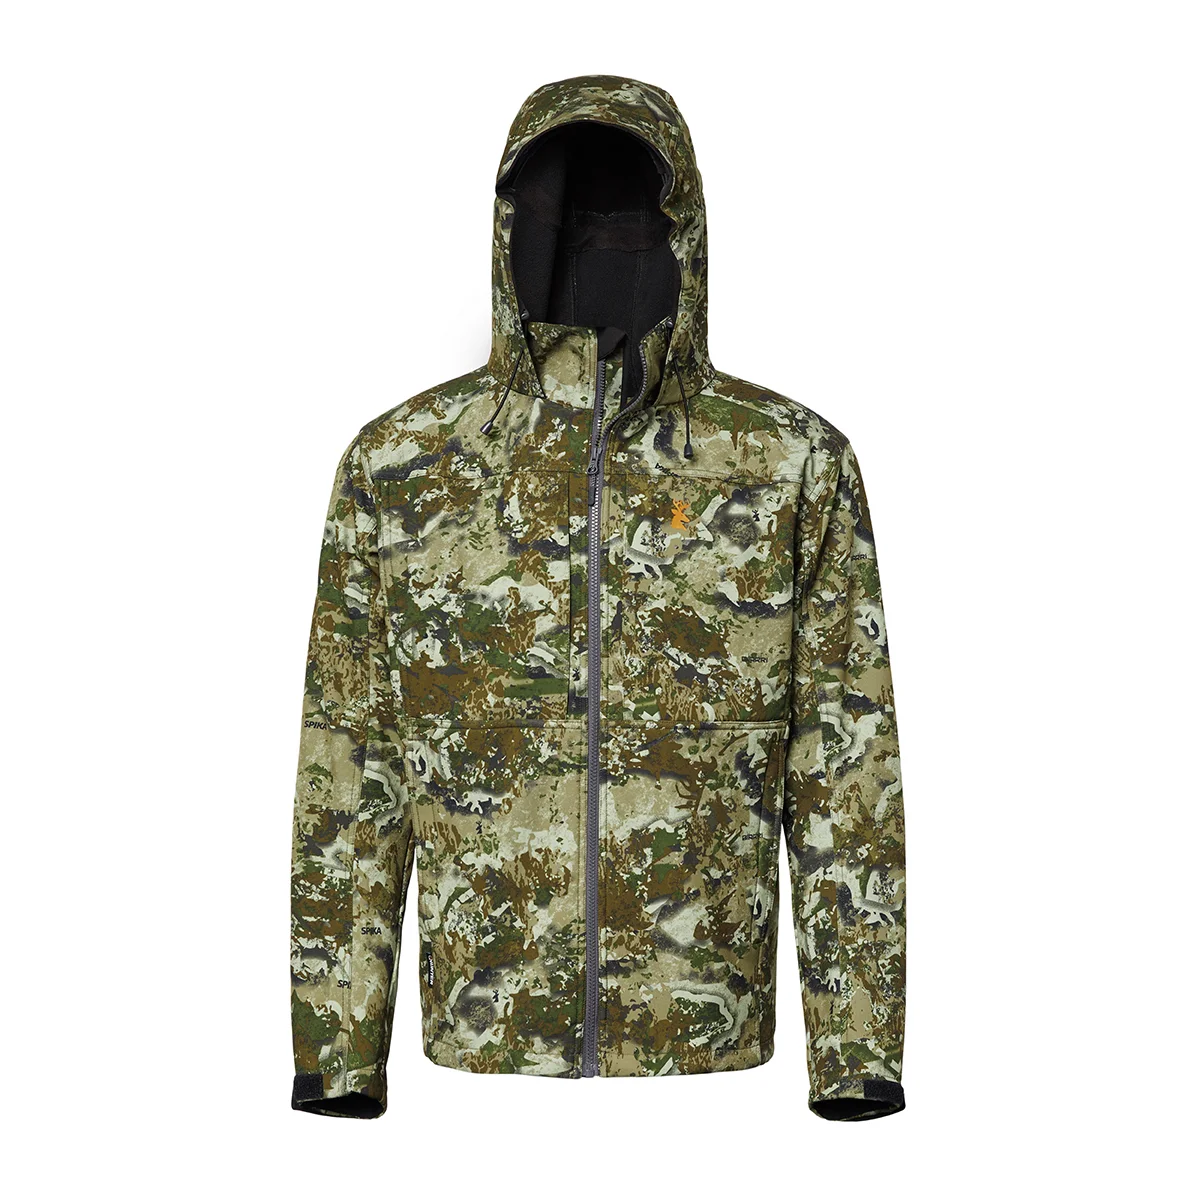 Spika Highpoint Soft Shell Jacket - Biarri Camo - S - Mansfield Hunting & Fishing - Products to prepare for Corona Virus